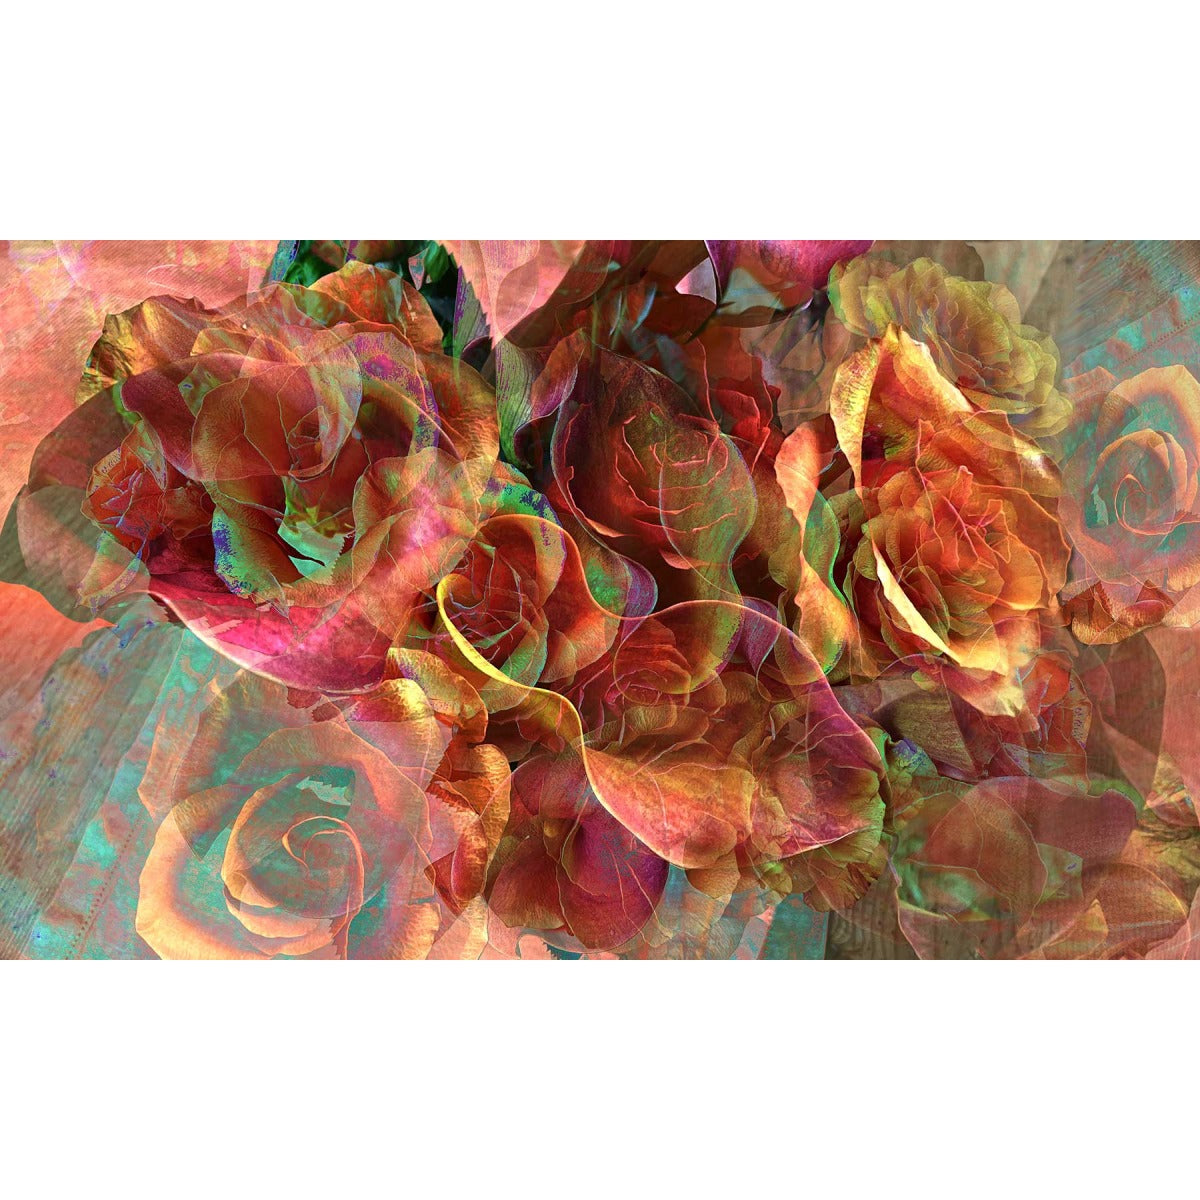 Roses & Callas (1/3 Limited Edition)